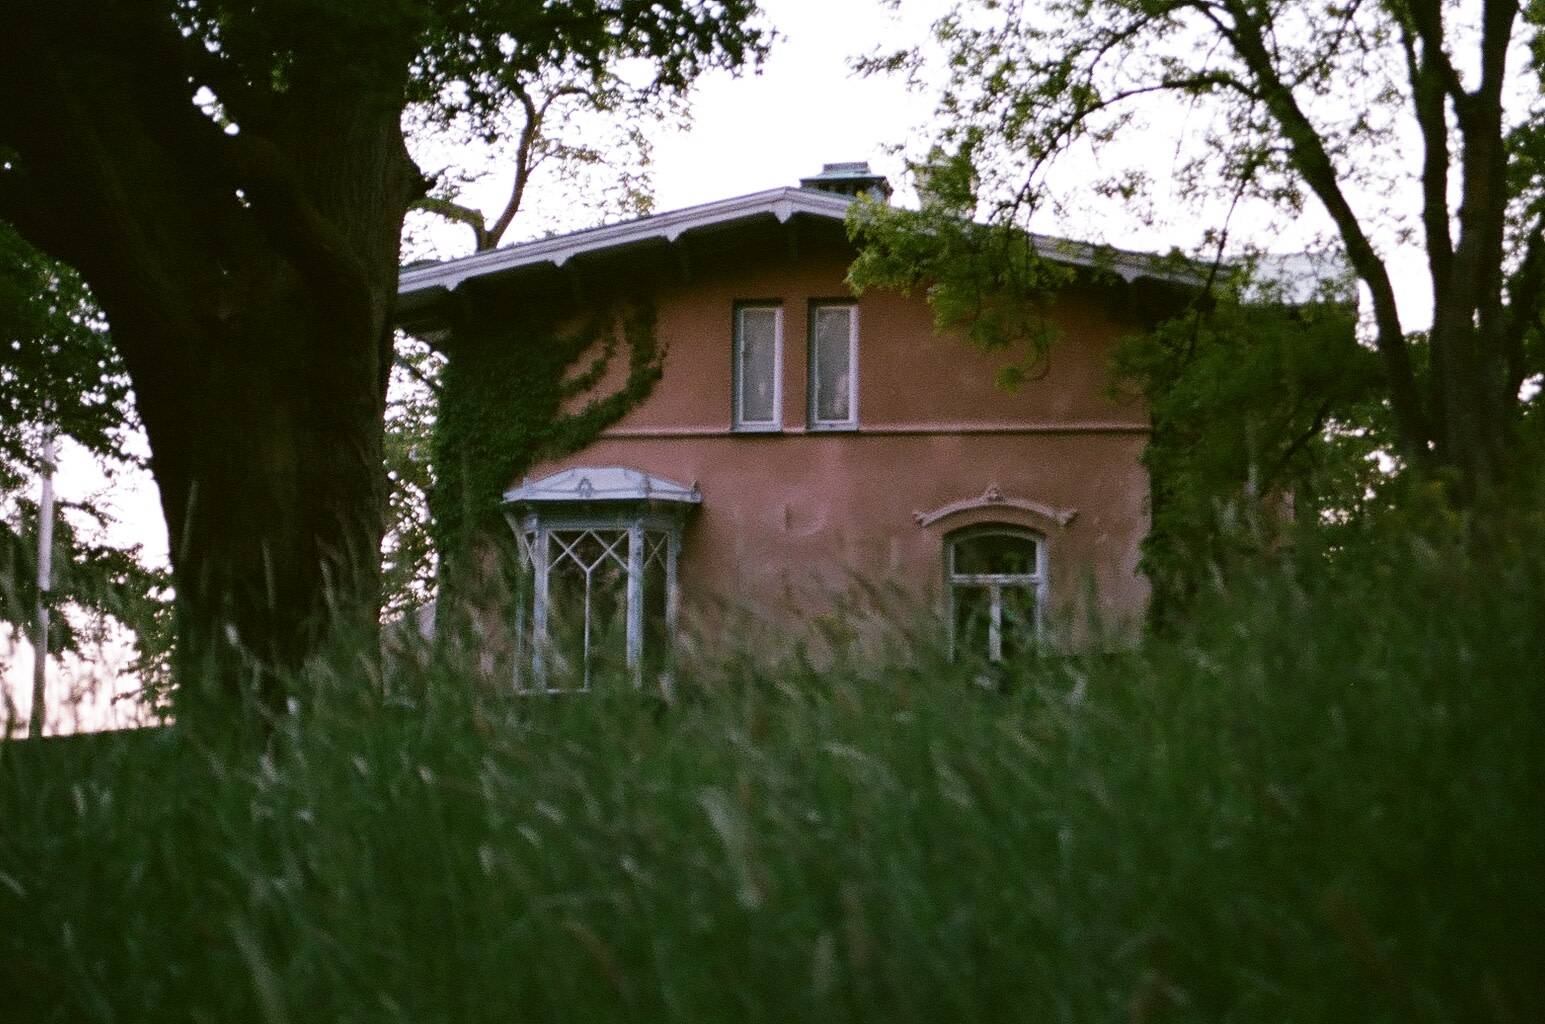 two floored brick coloured house behind thick grass and the silhouette of a tree